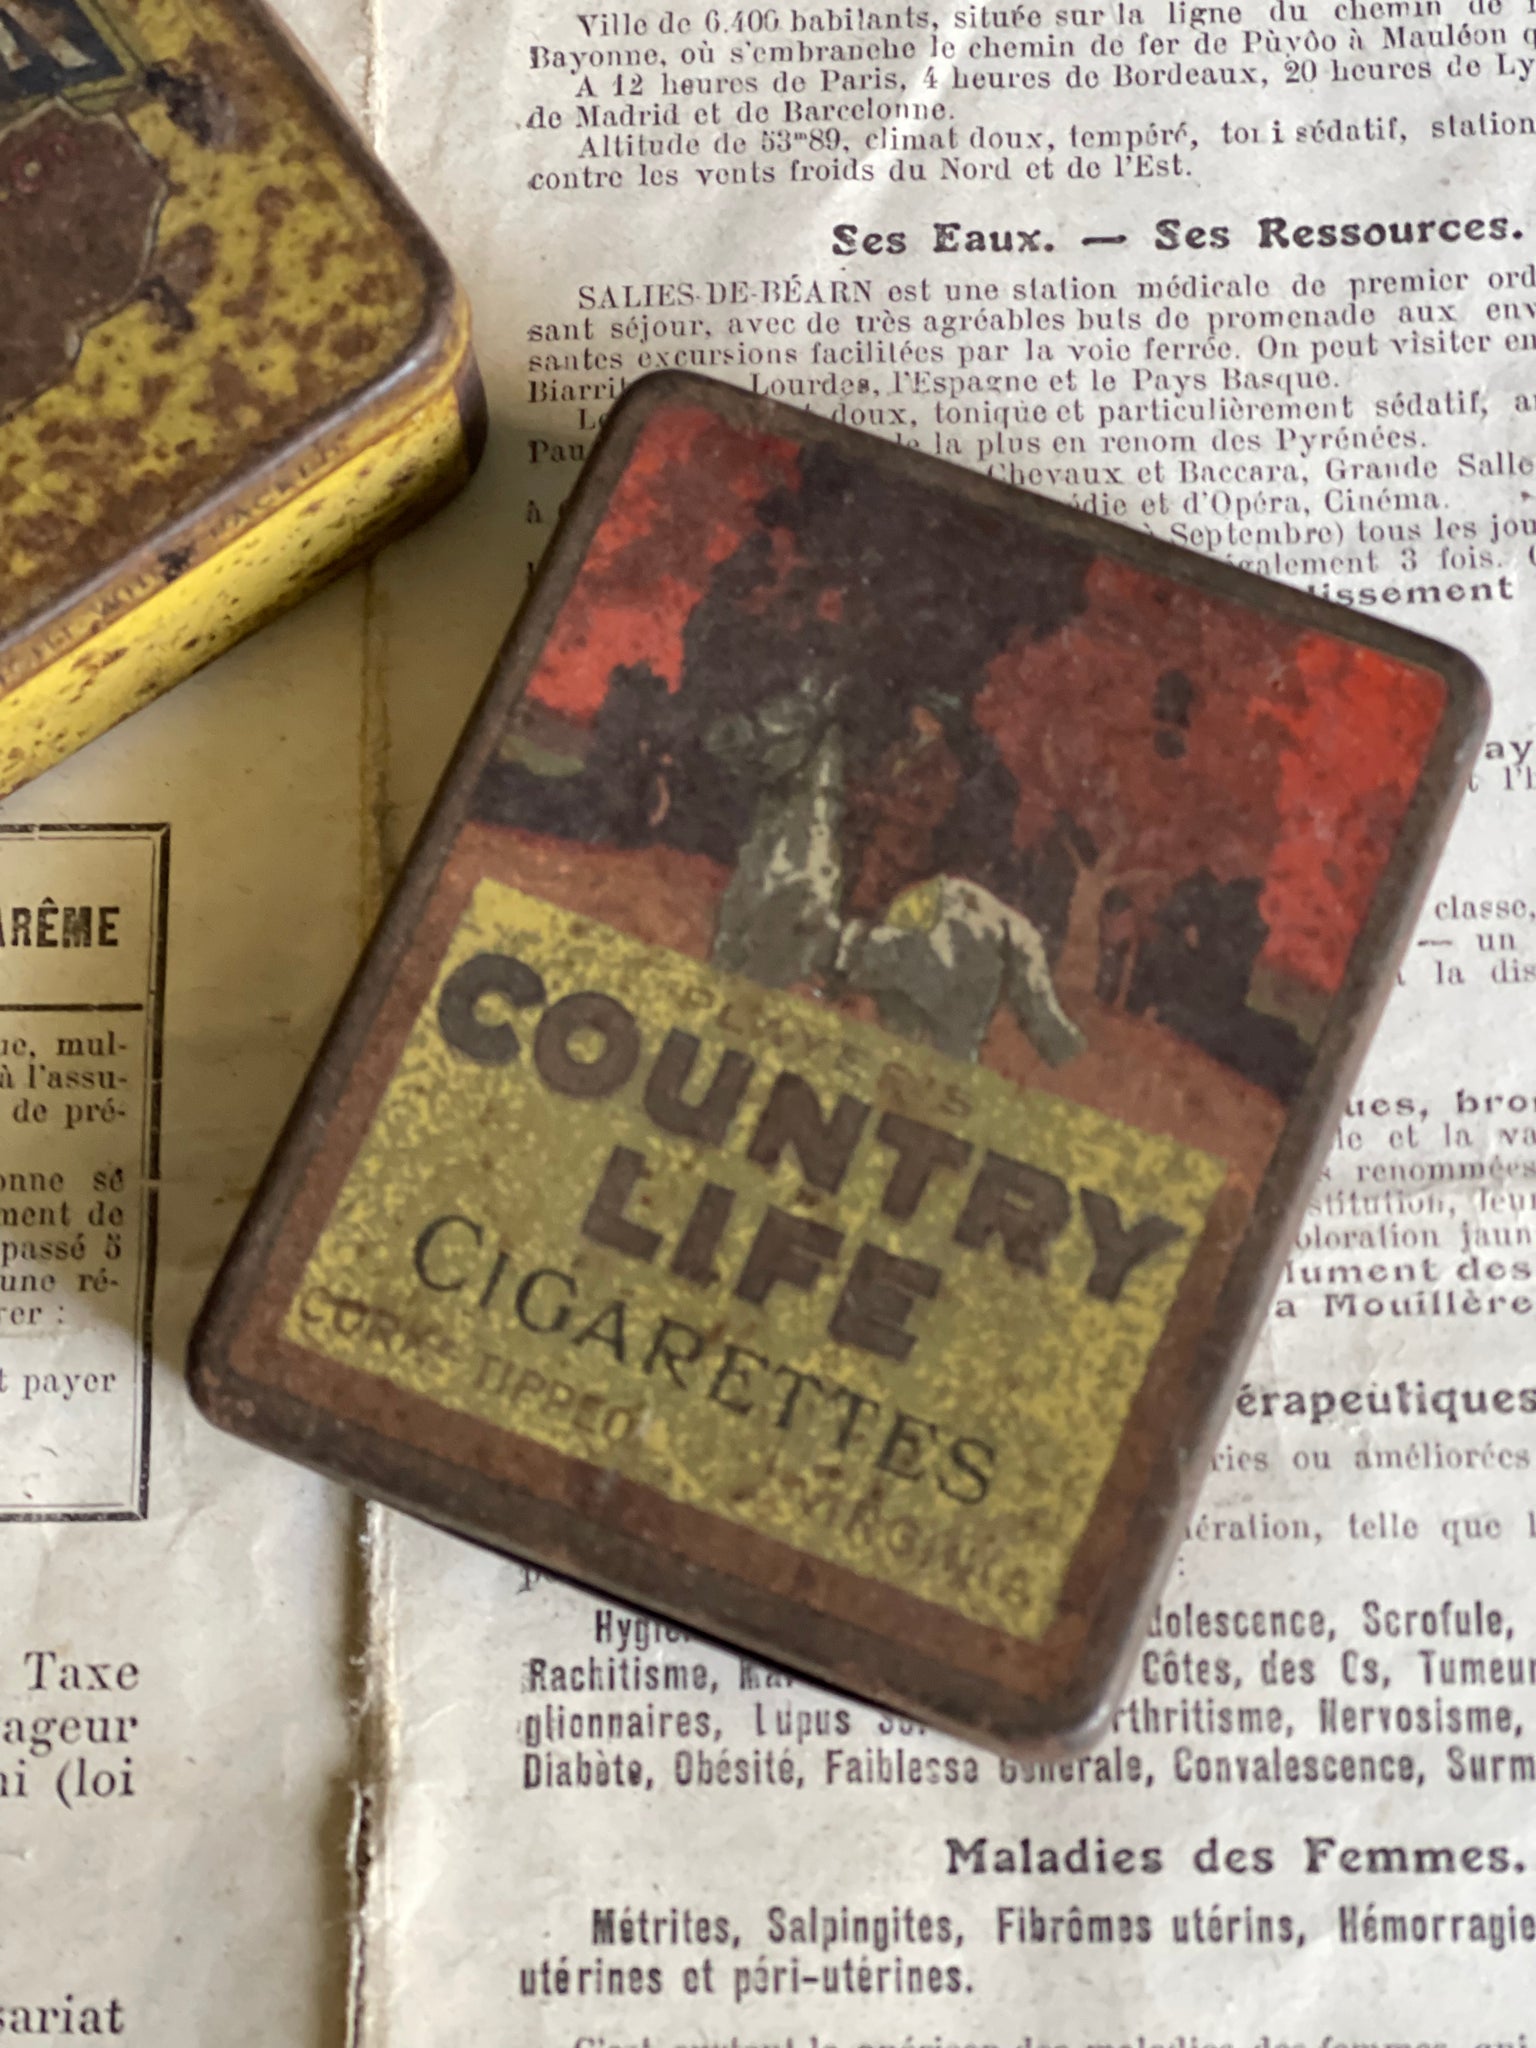 2 x Country Life Cigarette Tins - Excellent